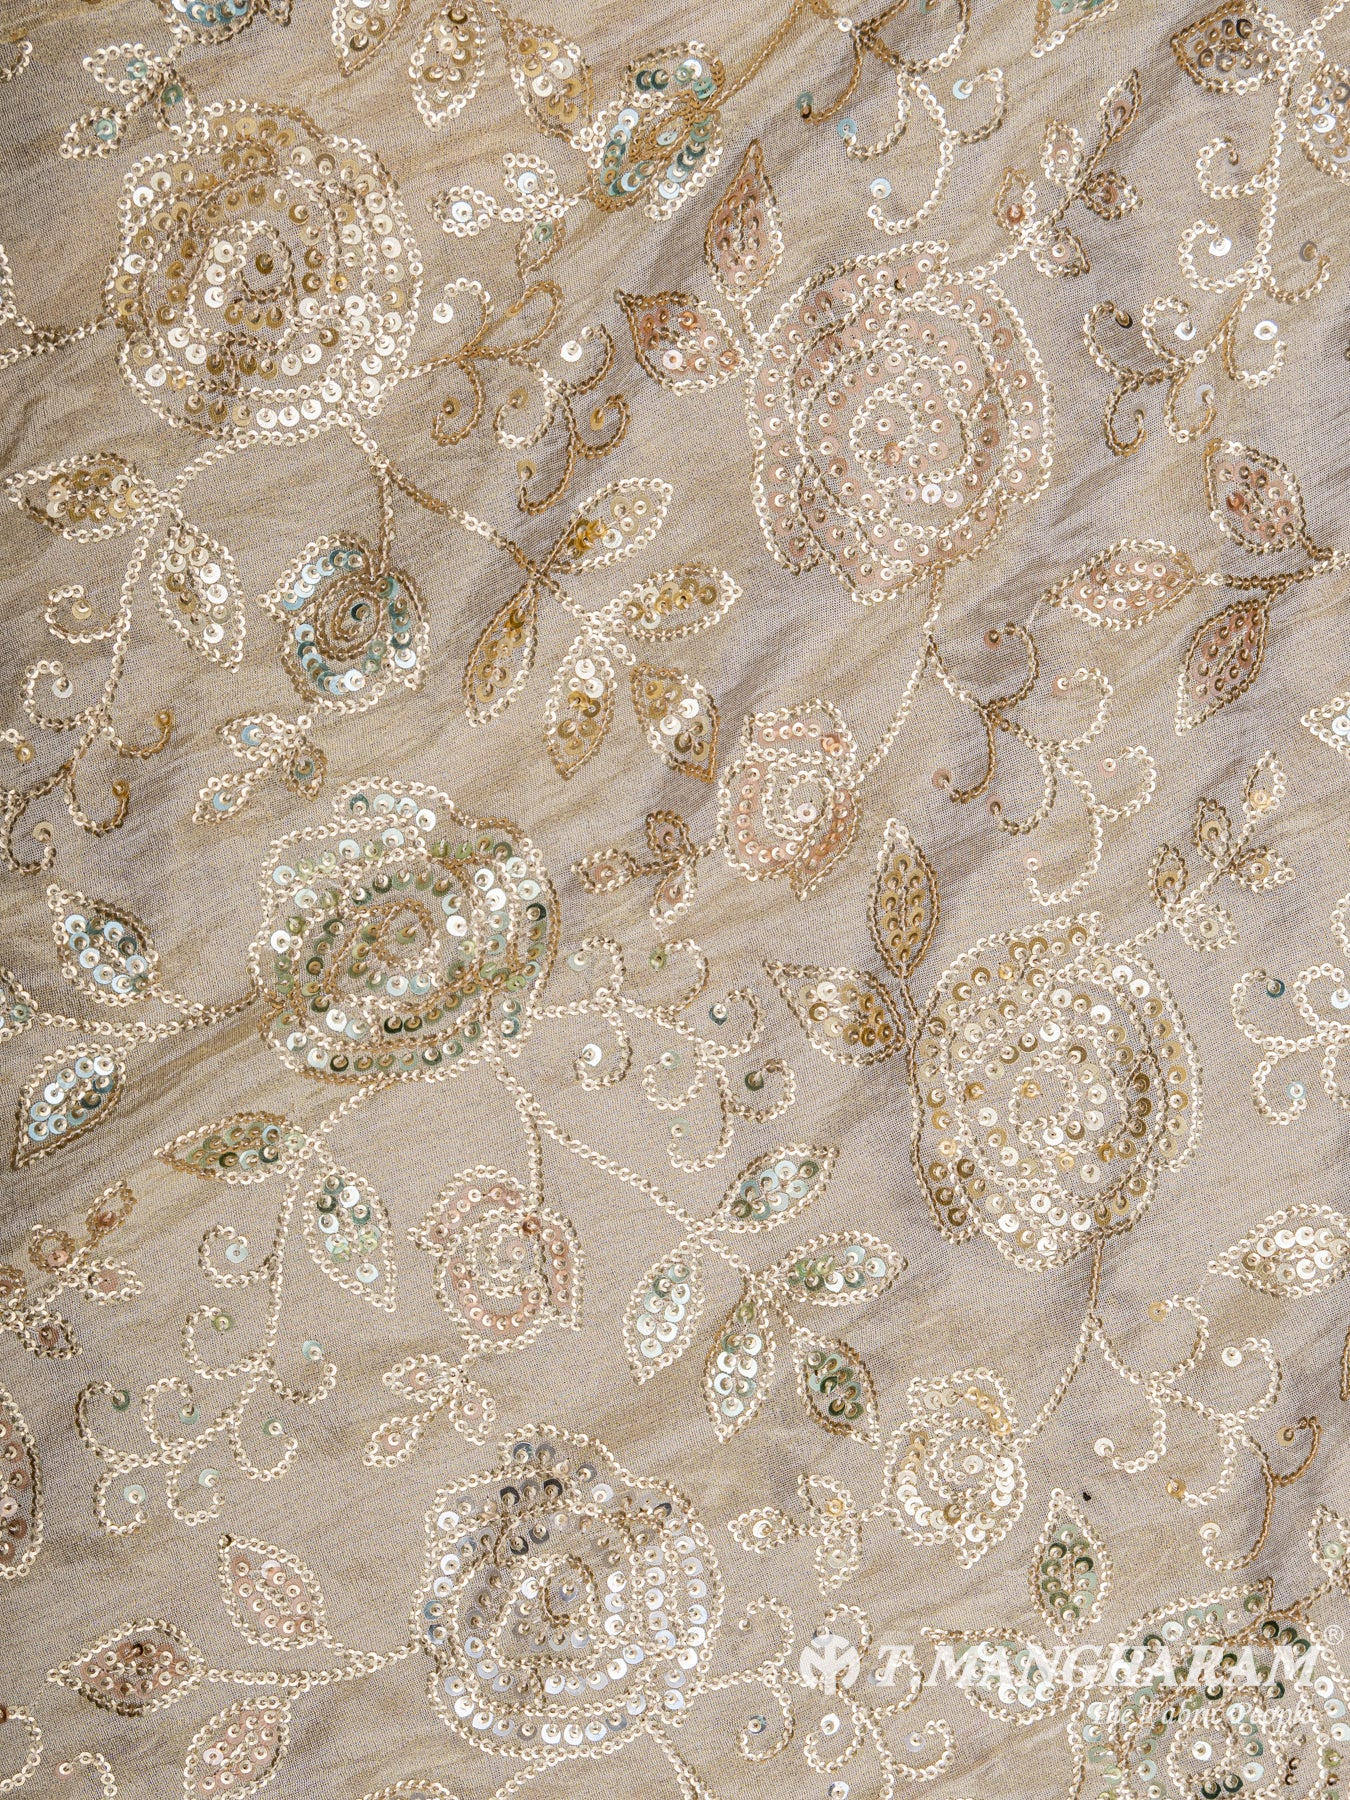 Beige Tissue Embroidery Fabric - EB4874 view-3